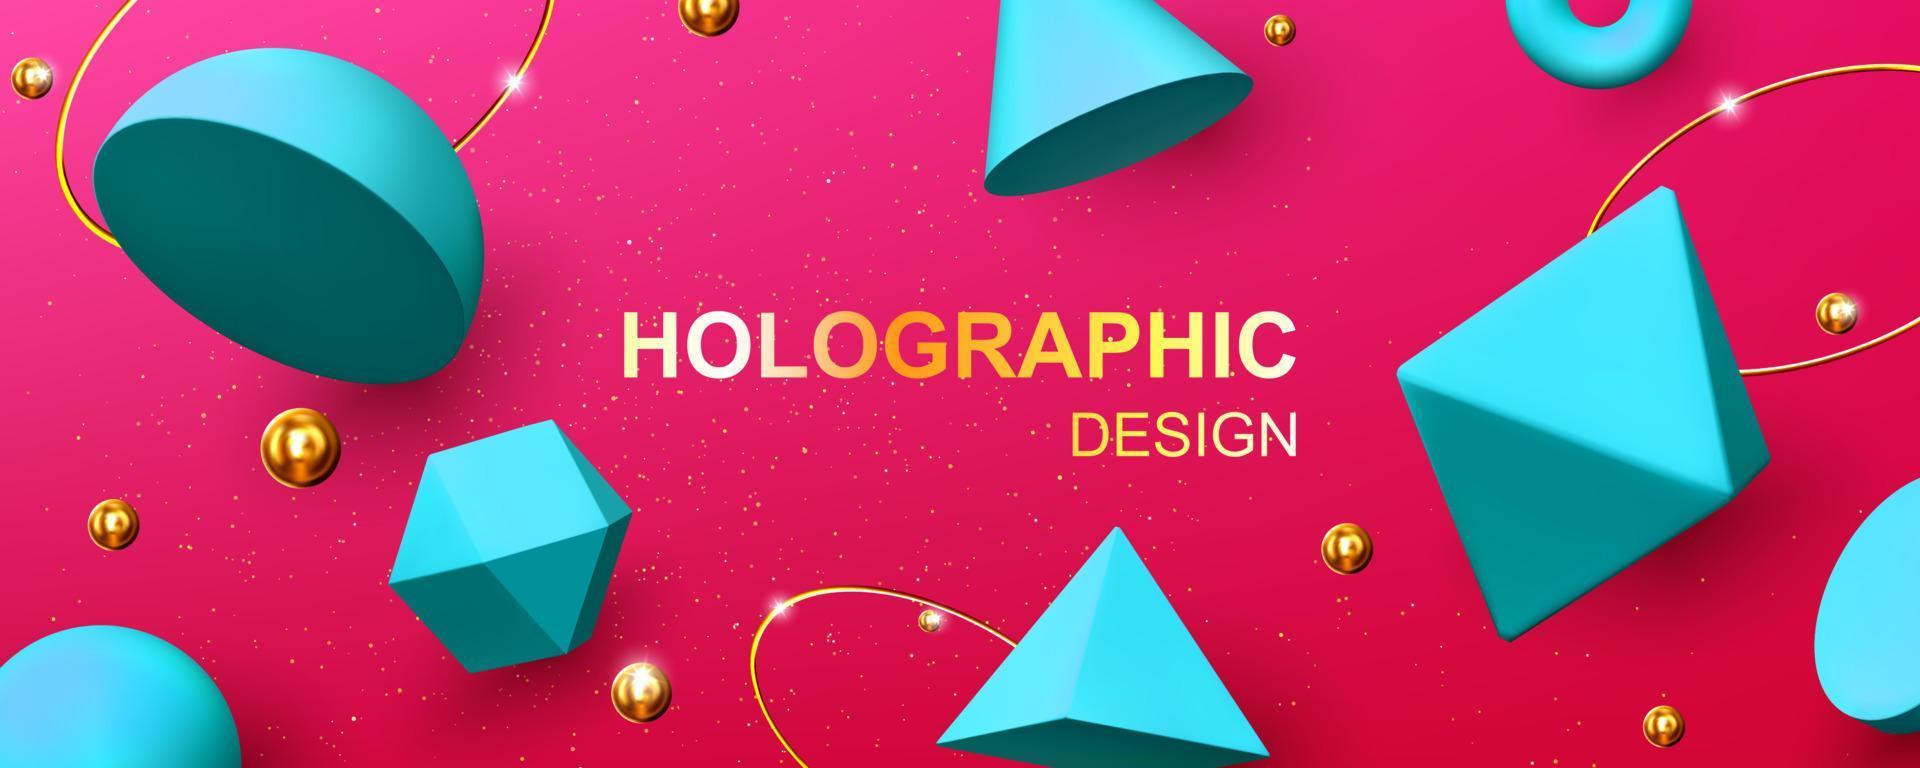 Holographic background with 3d geometric shapes vector